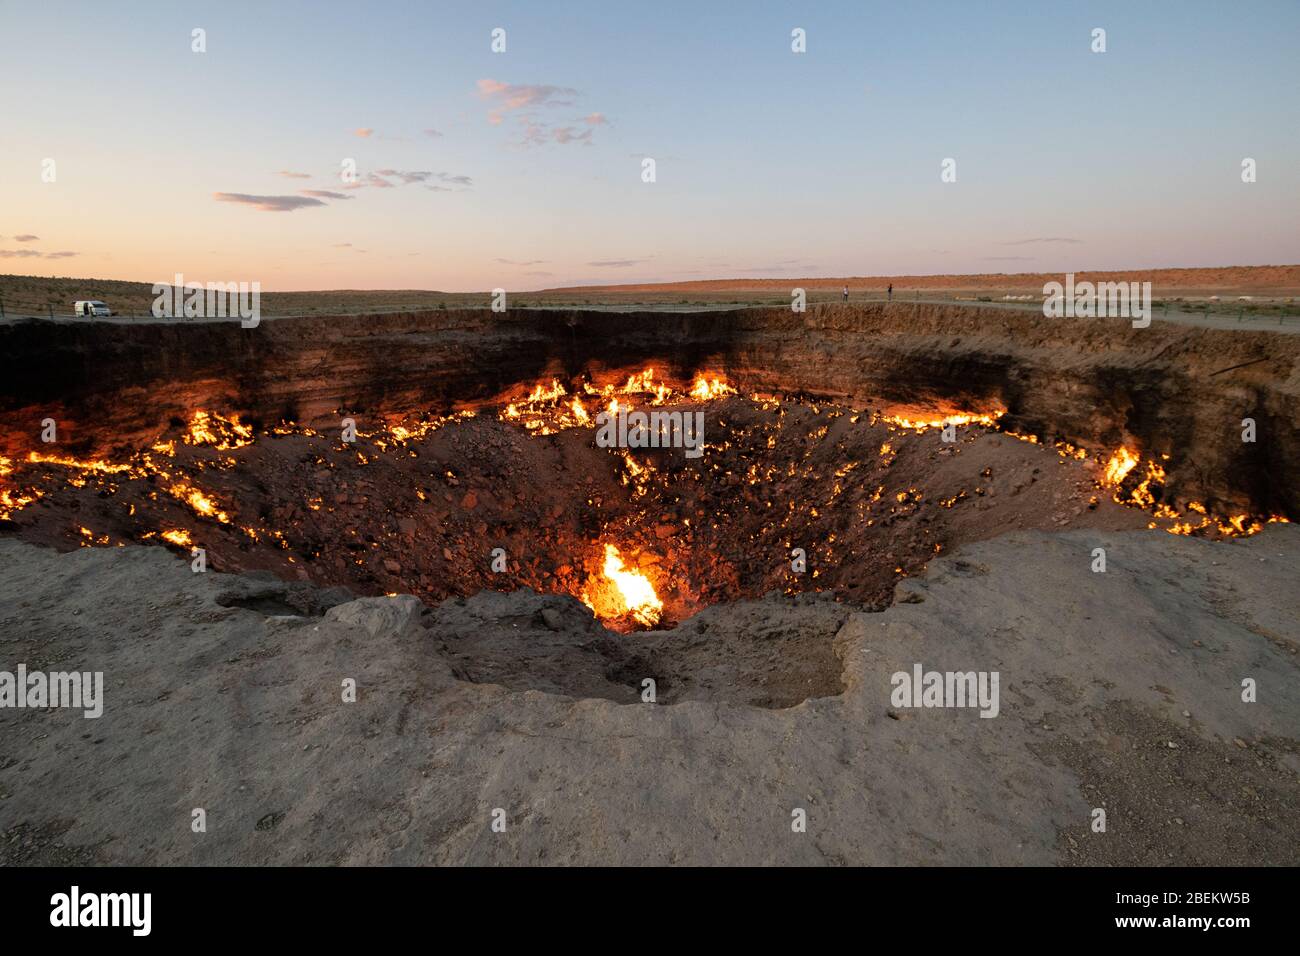 Sunset at the Darvasa Crater, also known as the Doorway to Hell, the flaming gas crater in Darvaza (Darvasa), Turkmenistan Stock Photo